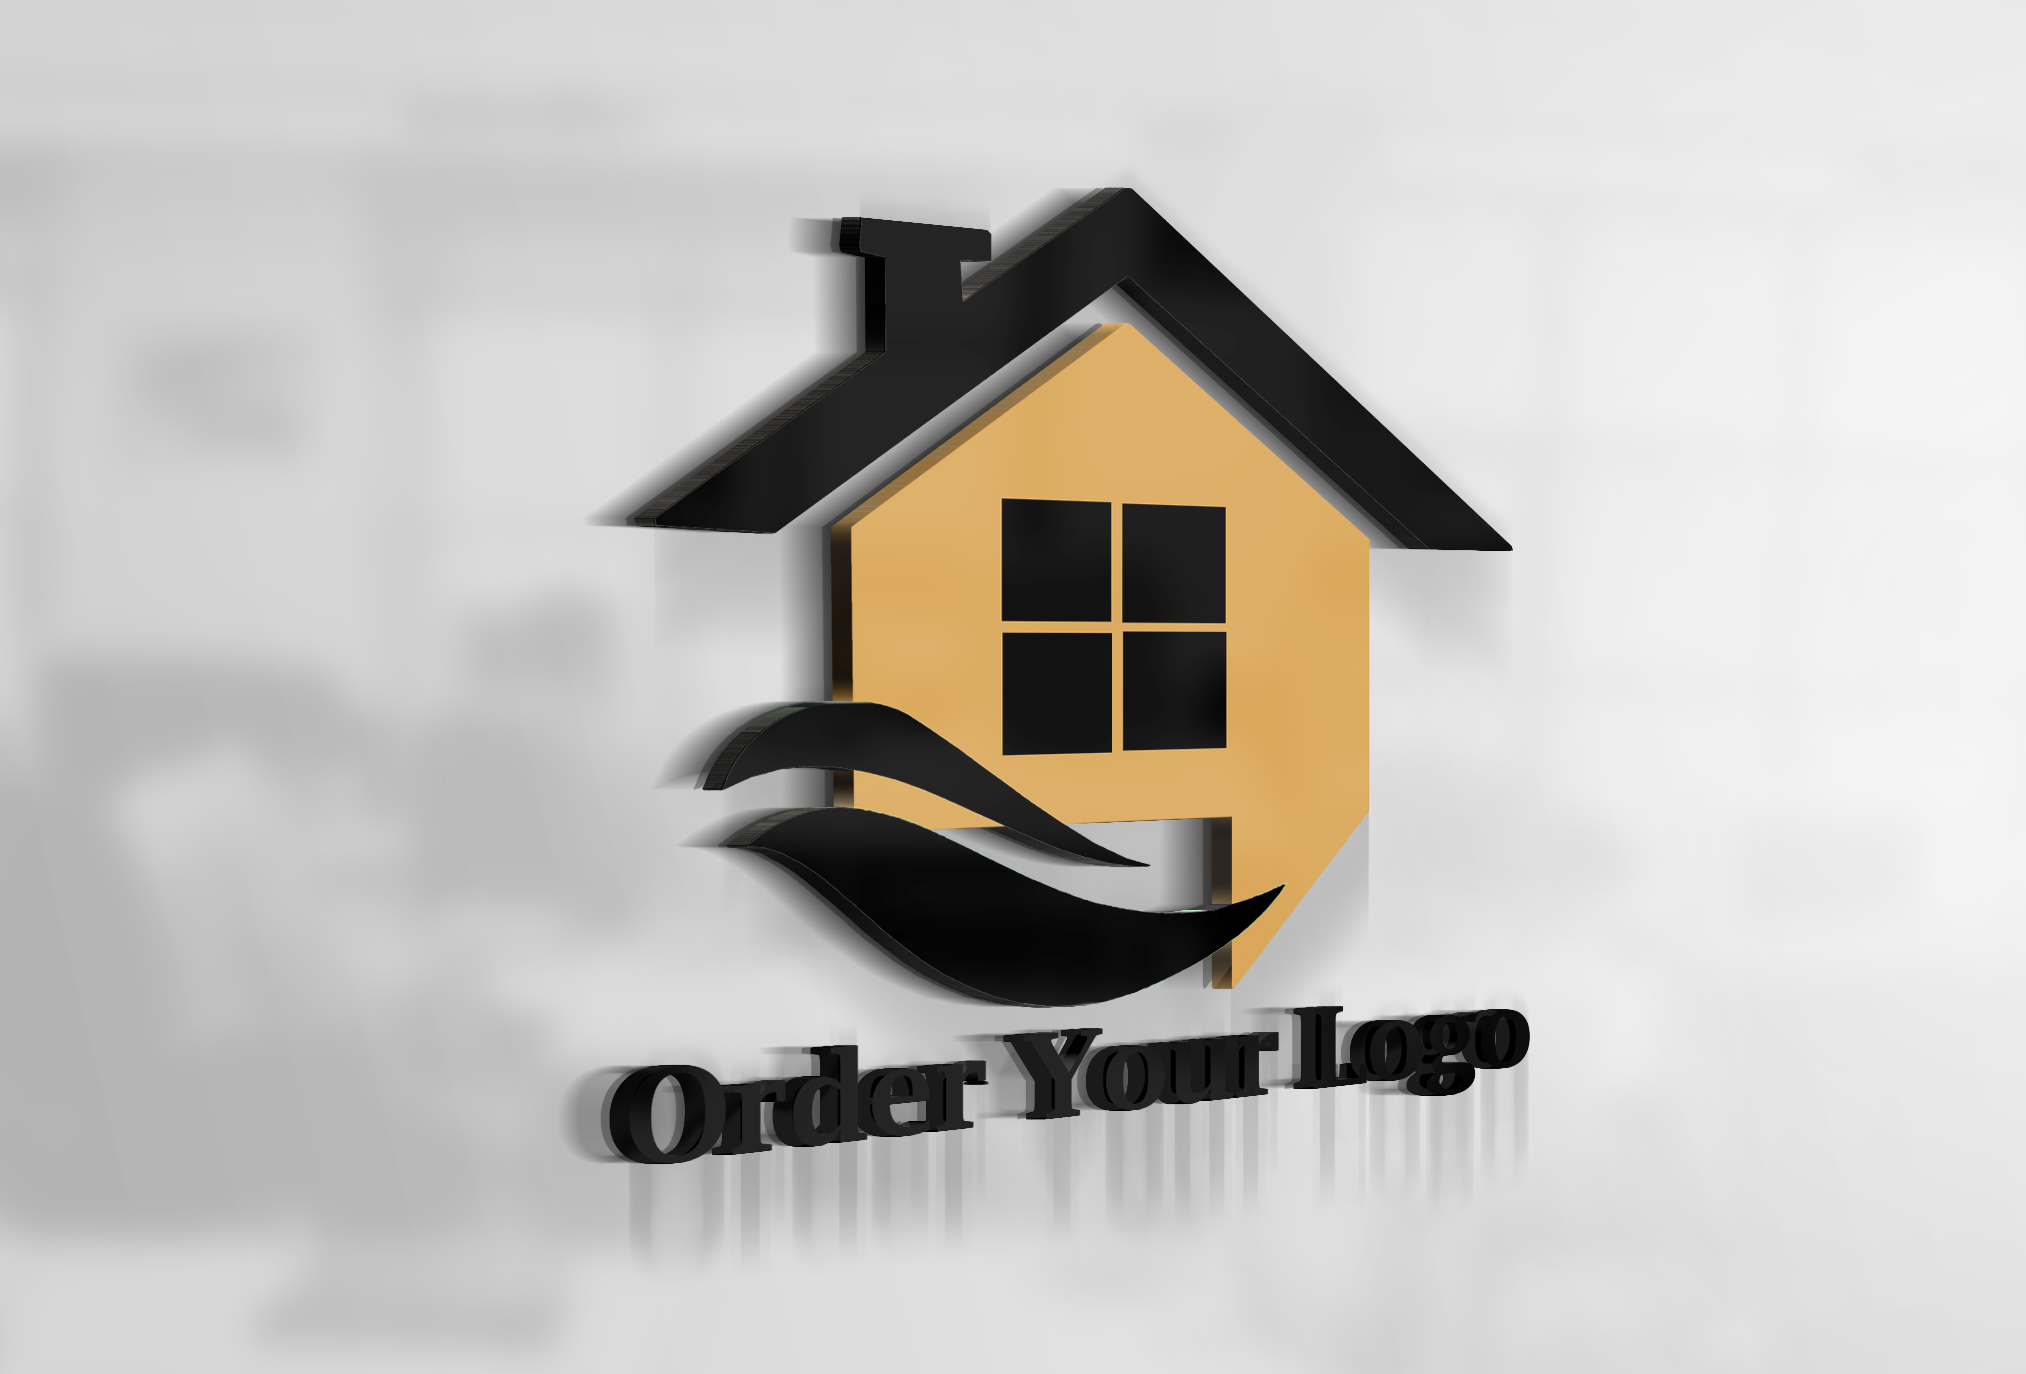 Photoshop Editing and Logo design for $15  SEOClerks